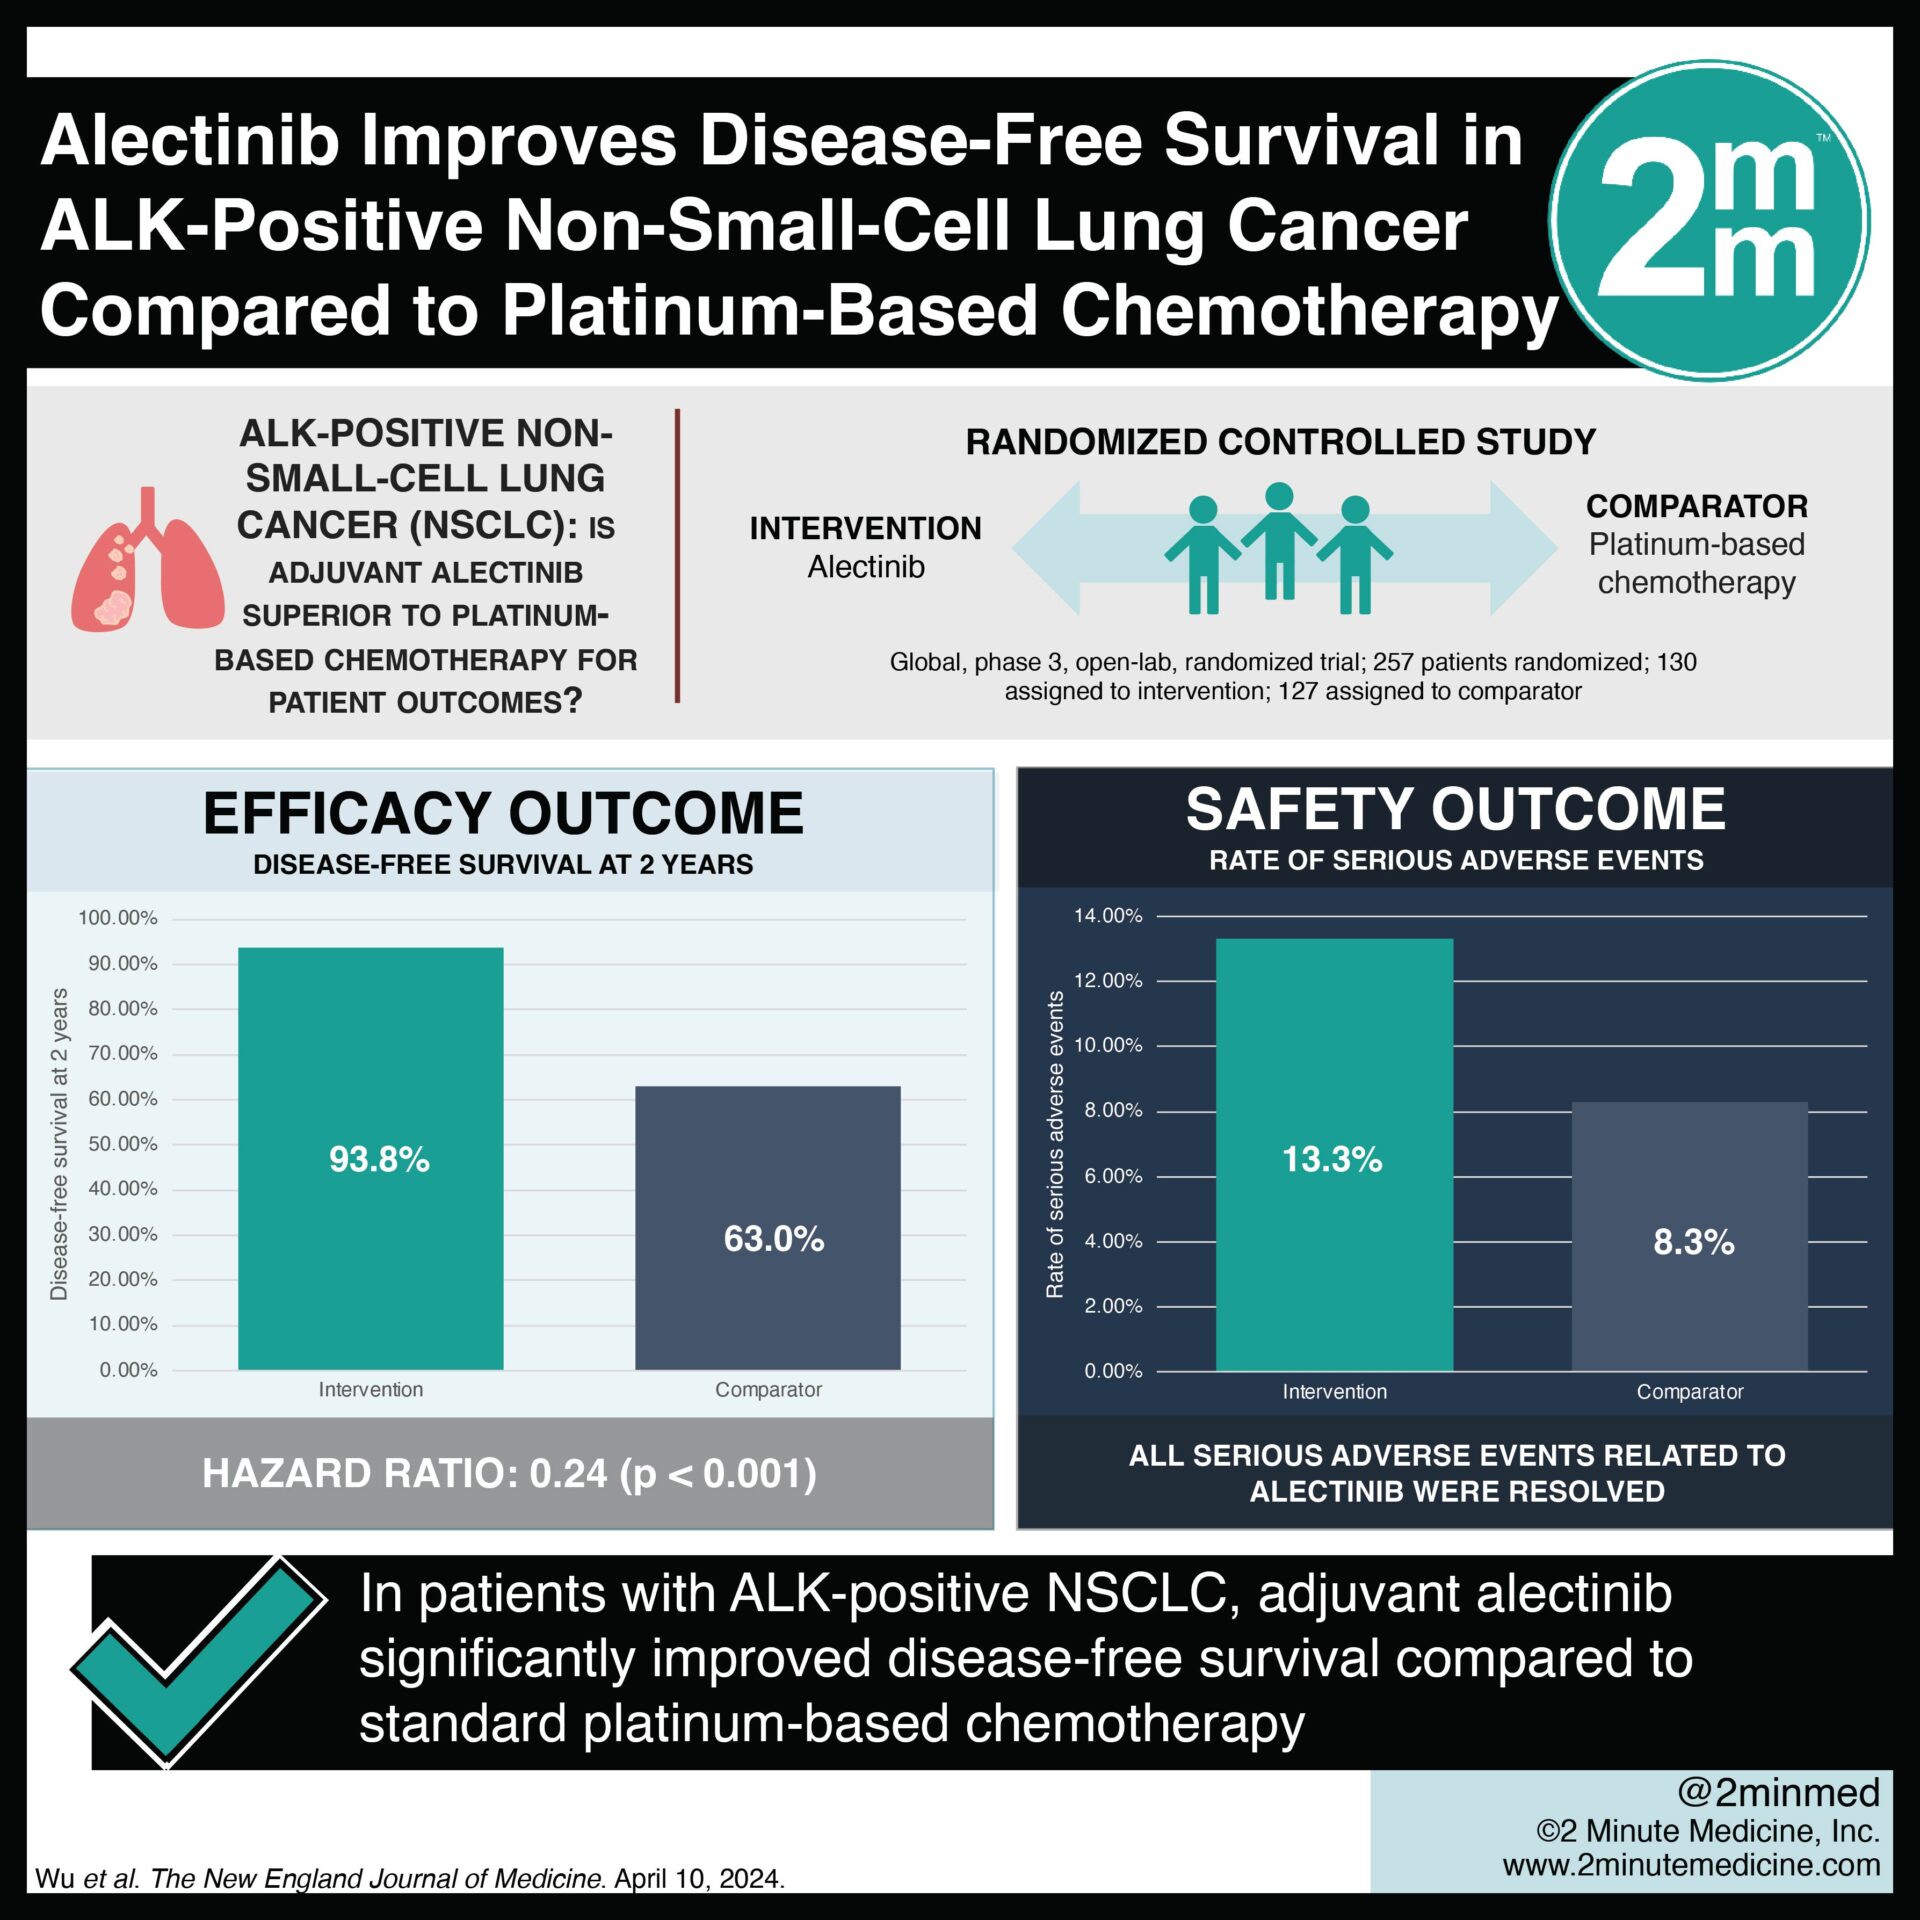 #VisualAbstract: Alectinib Improves Disease-Free Survival in ALK-Positive Non-Small-Cell Lung Cancer Compared to Platinum-Based Chemotherapy